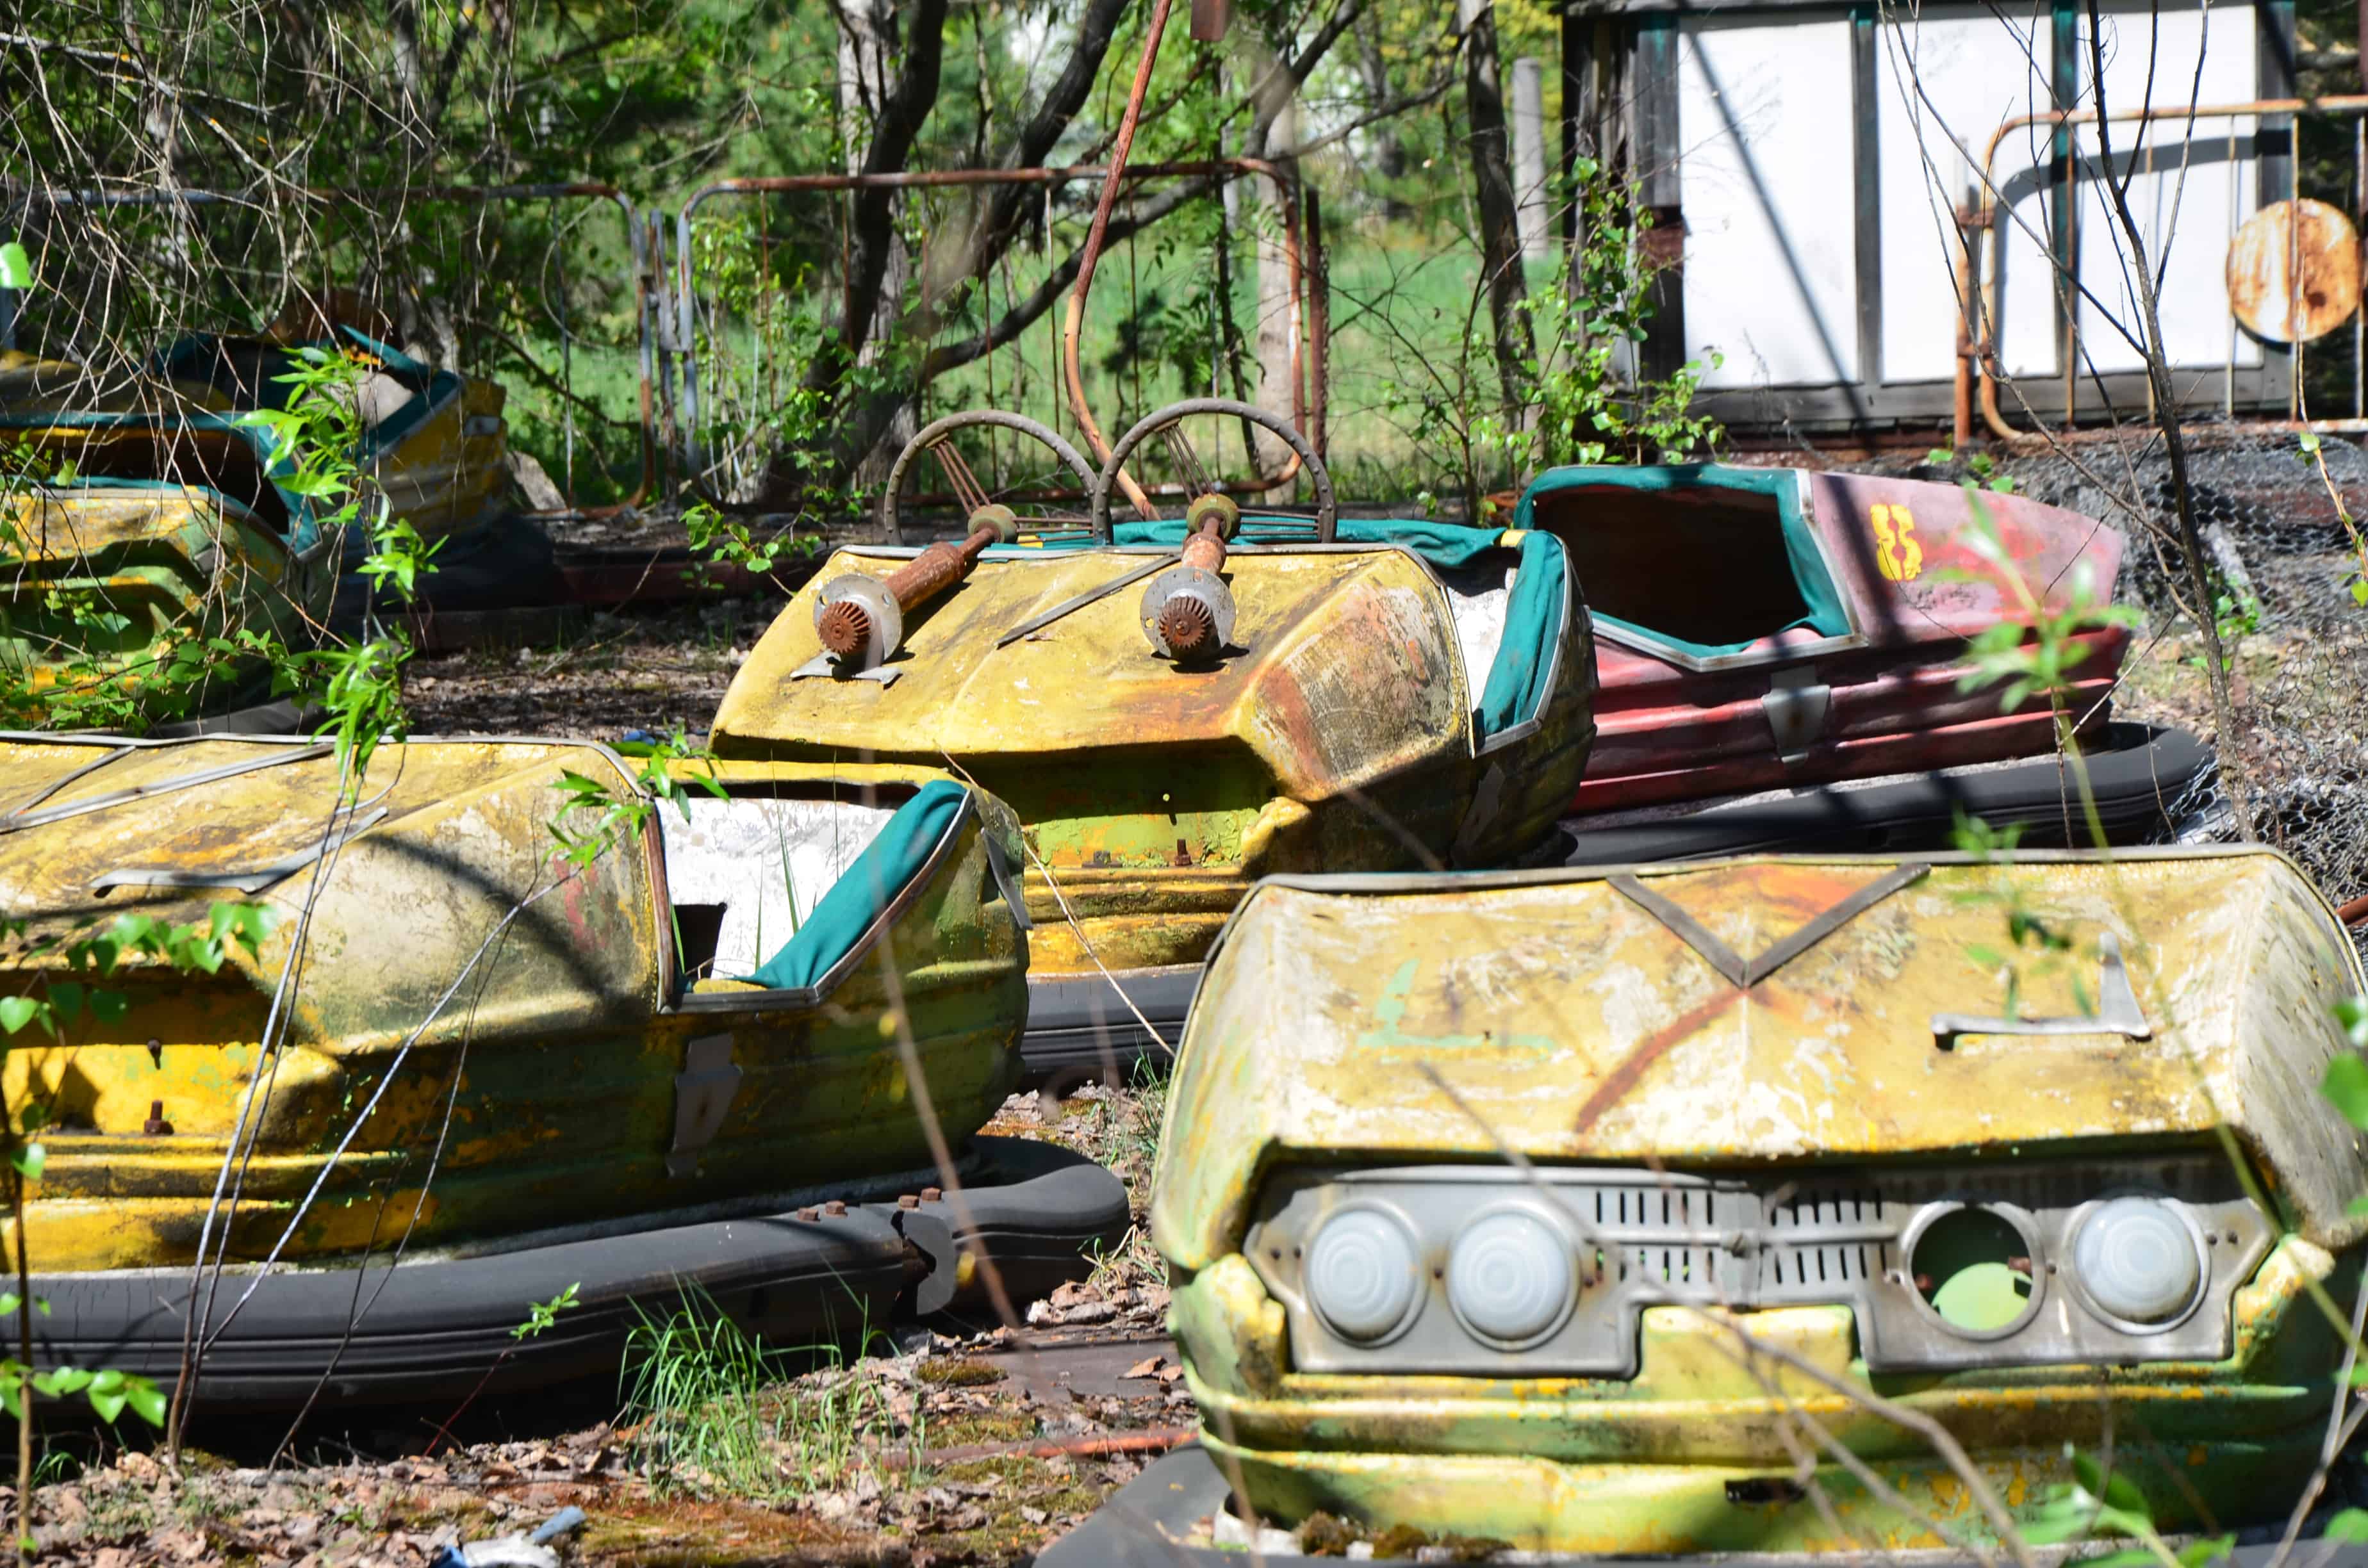 Bumper cars at the amusement park in Pripyat, Chernobyl Exclusion Zone, Ukraine